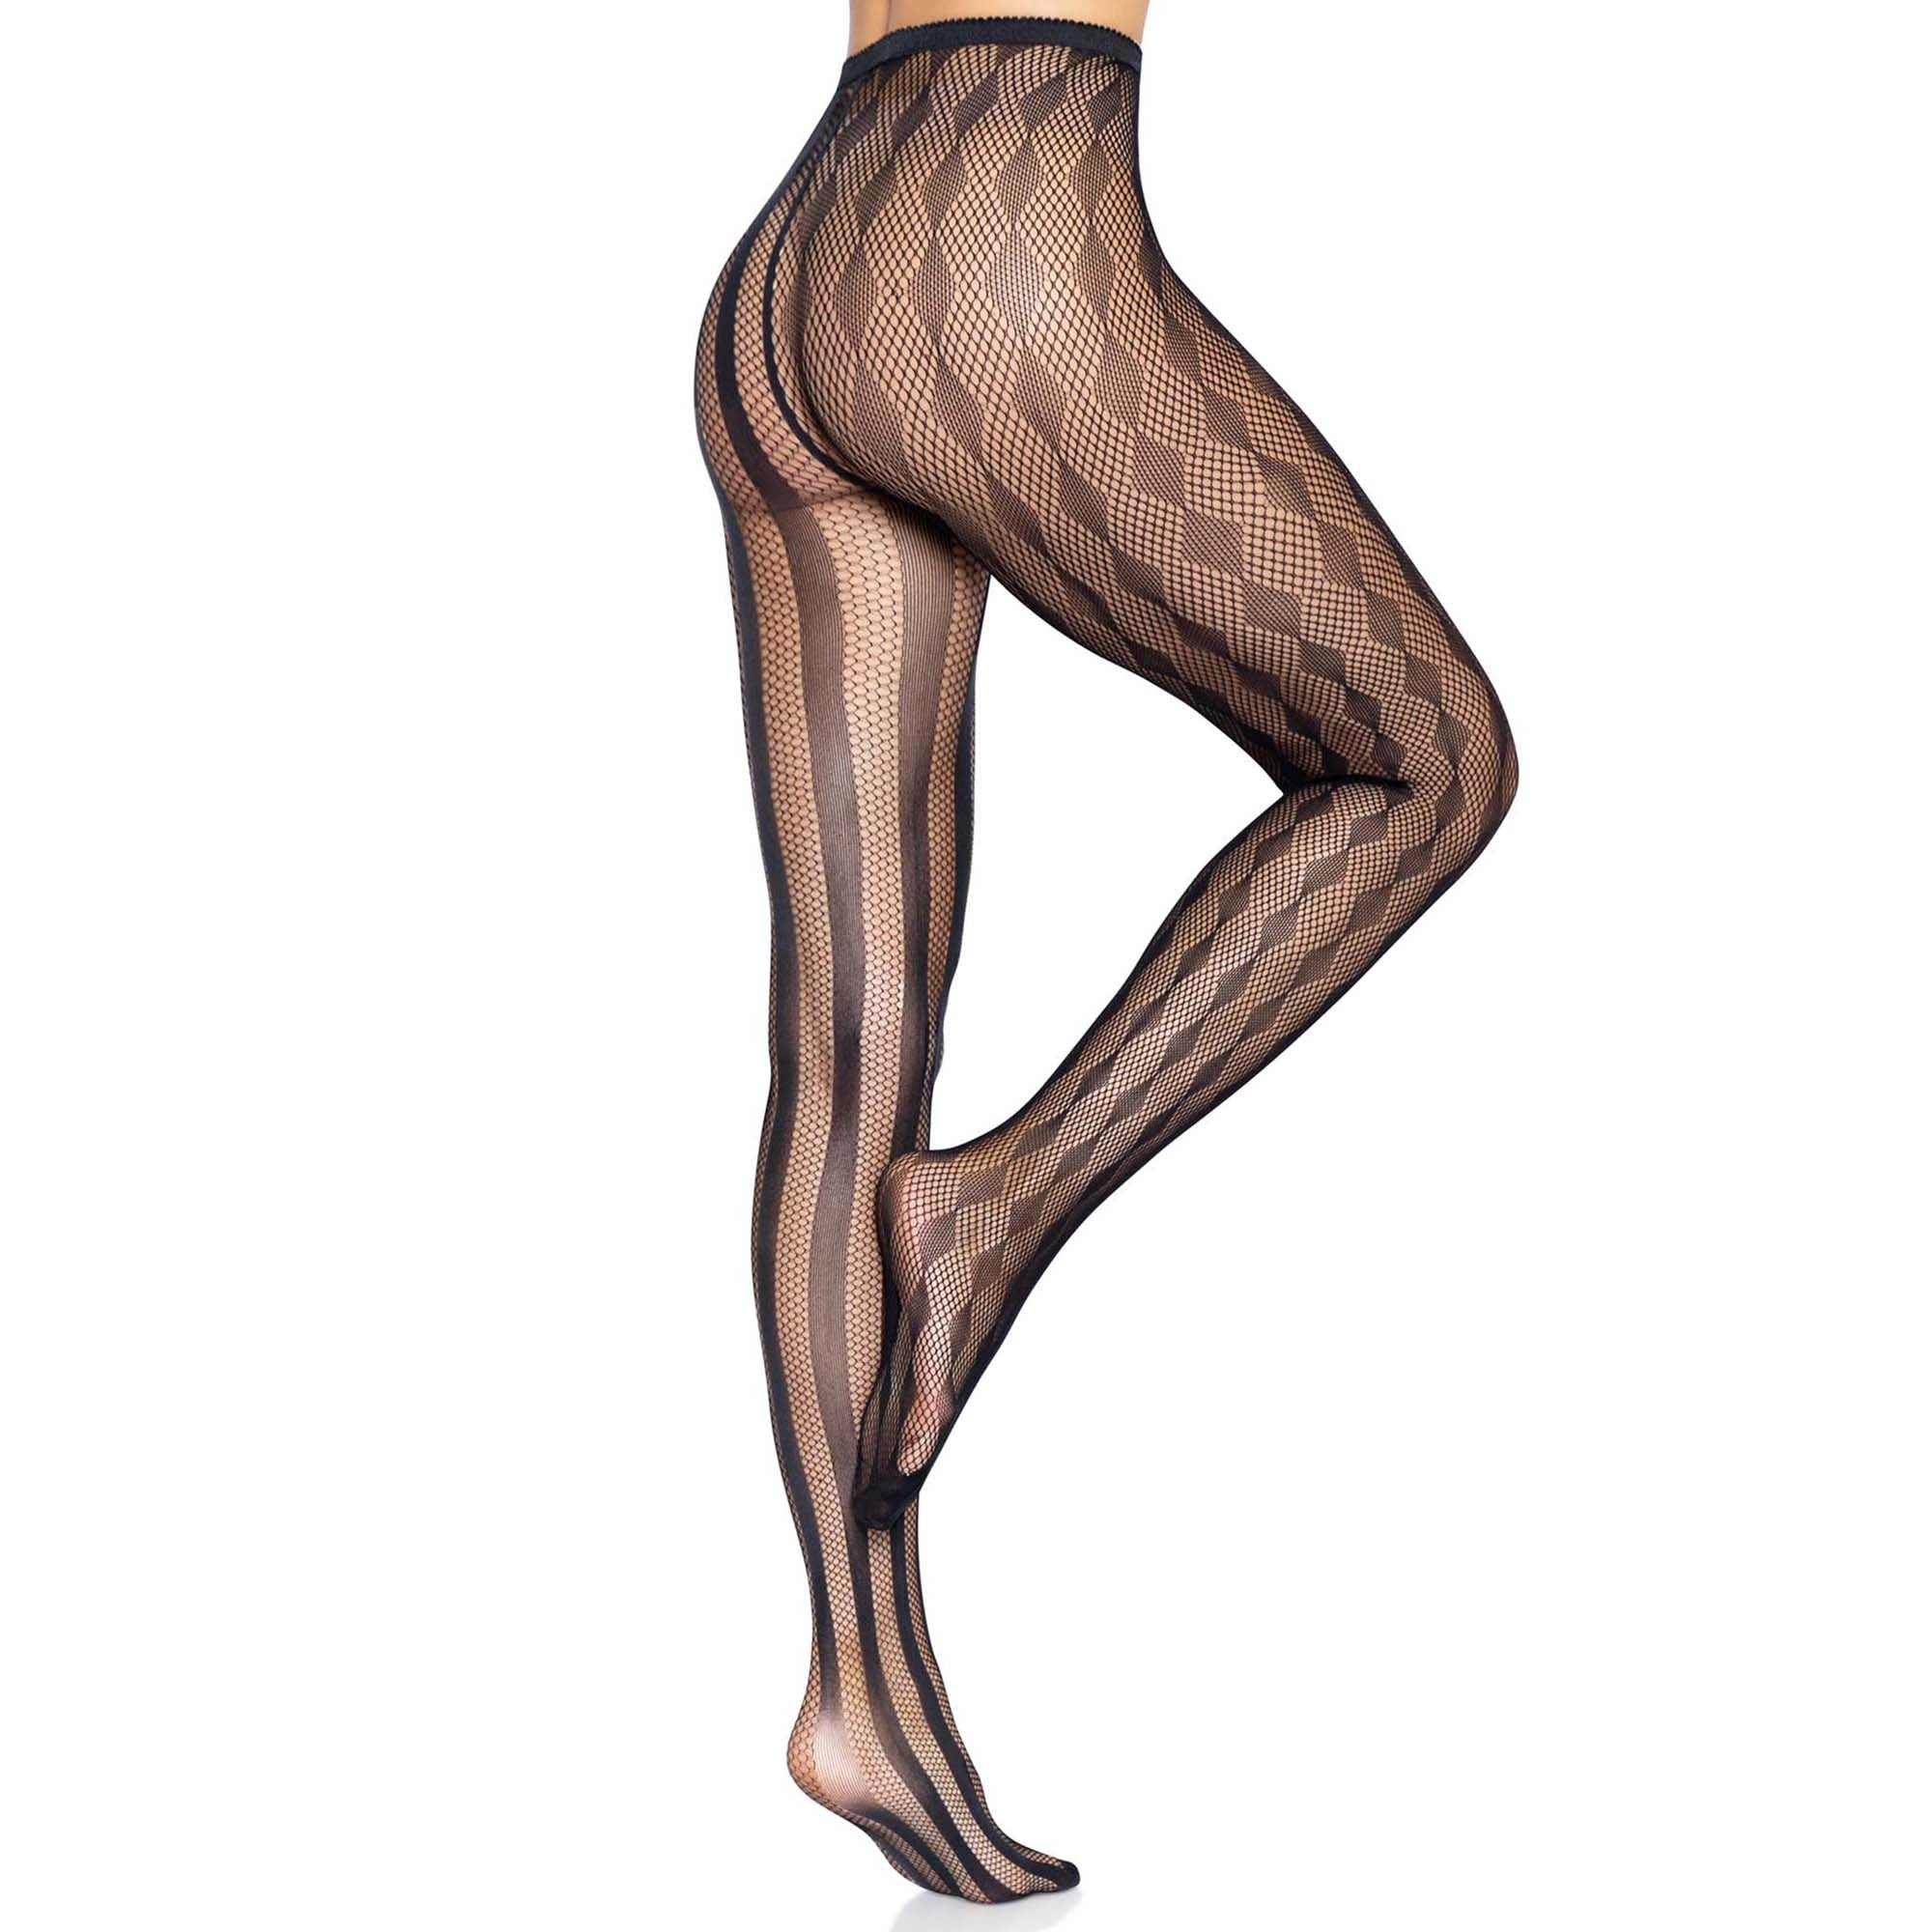 Nude Rhinestone Fishnet Tights for Adults, 1 Count